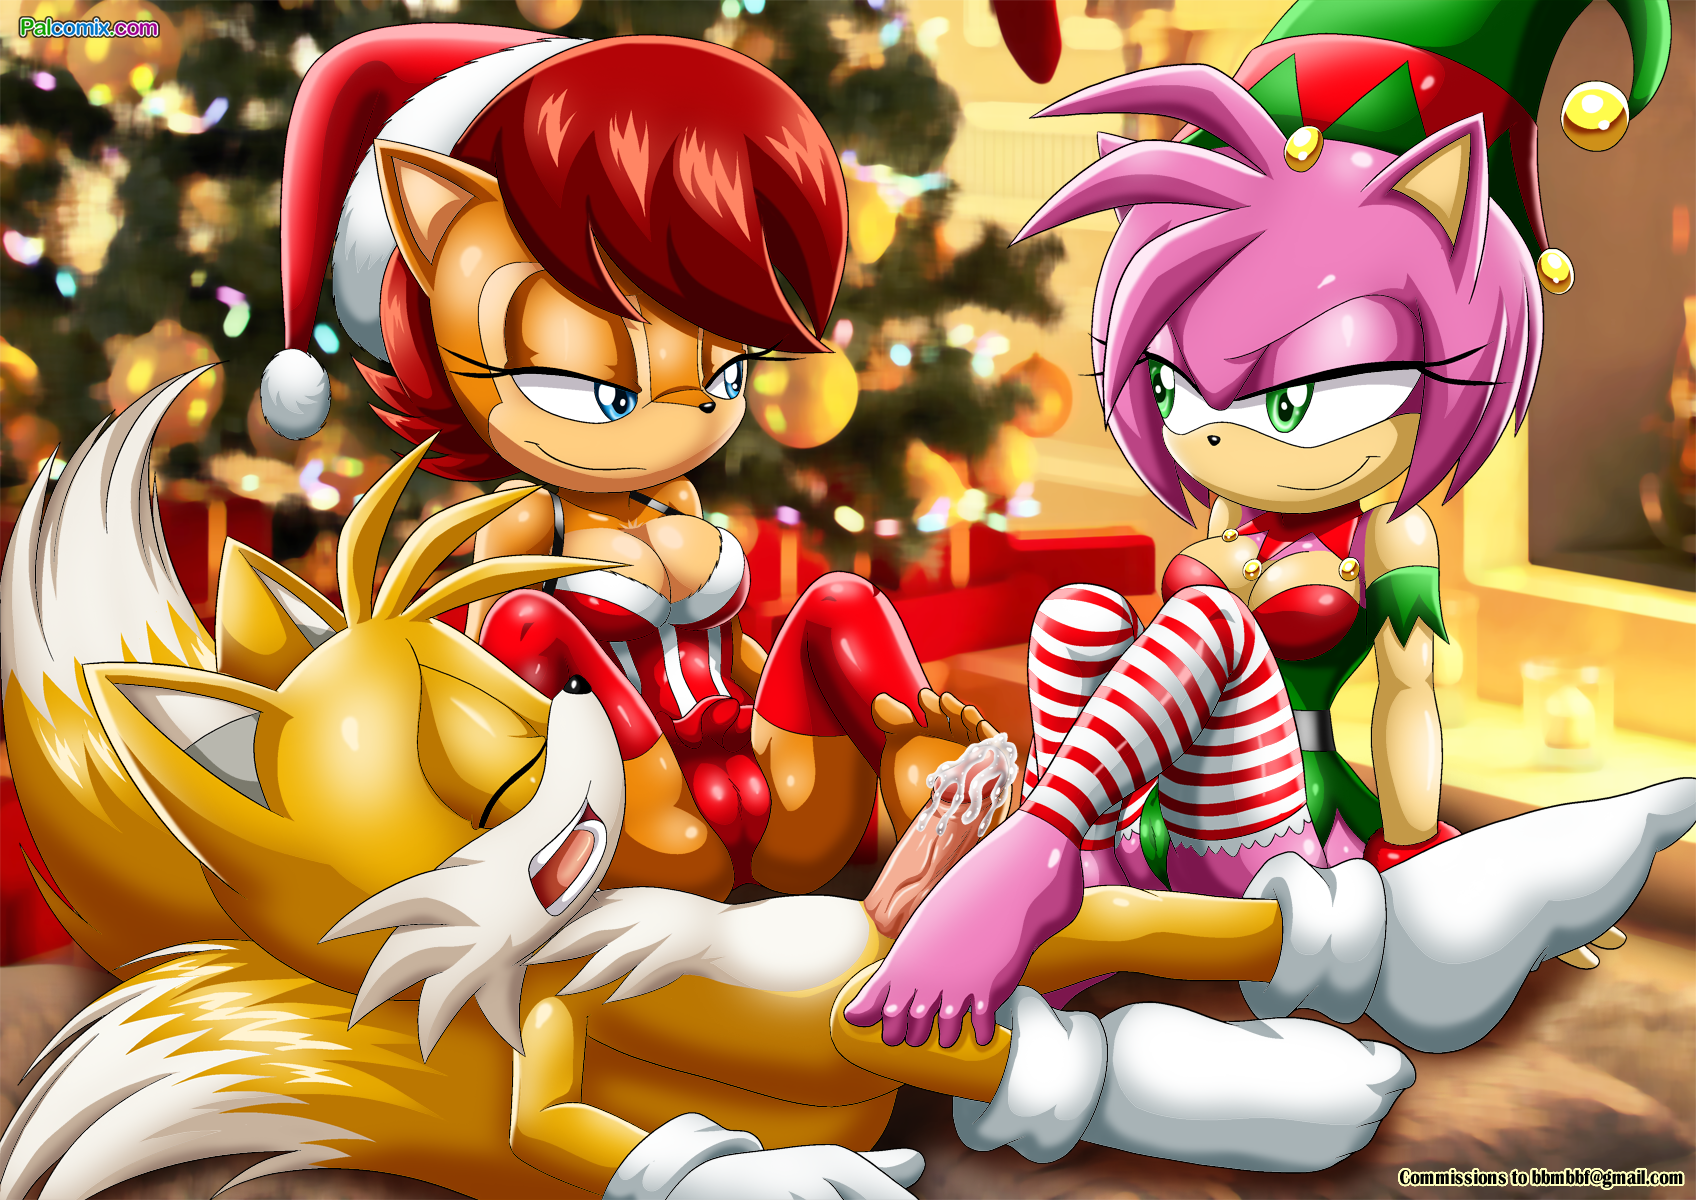 Rule 34 Collection: Amy Rose (3) .